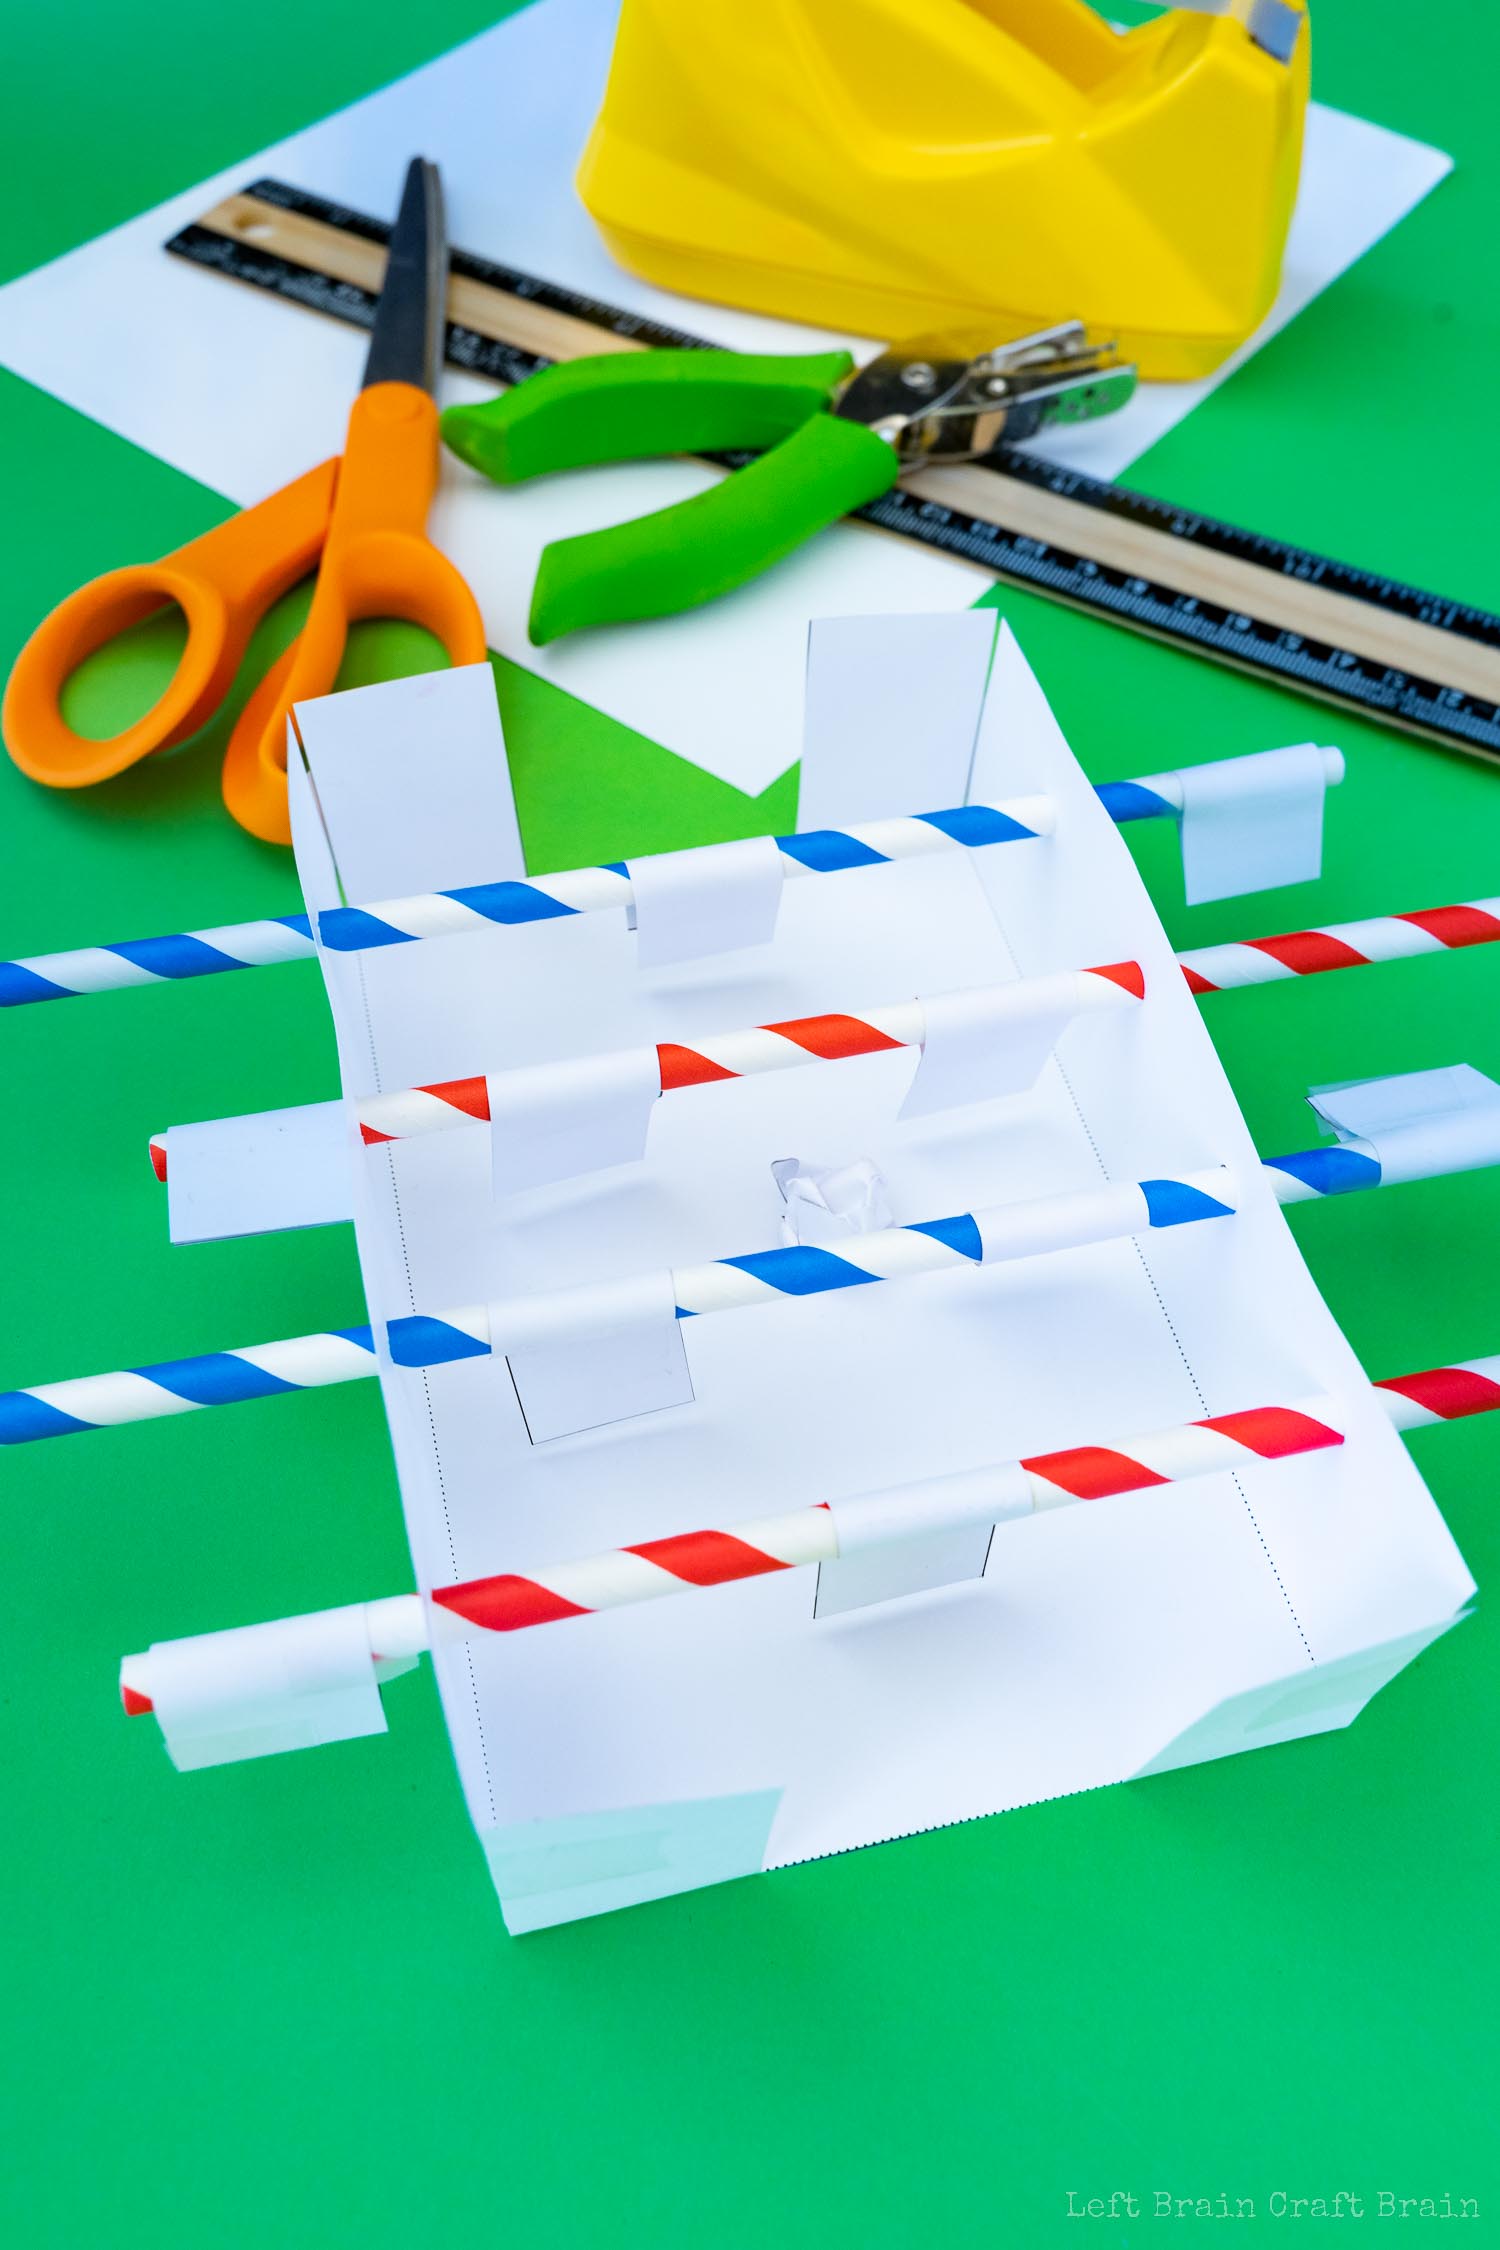 Finished paper foosball table with ball on field (green hole punch, red and blue striped paper straws, orange-handled scissors, yellow tape dispenser, black and wood ruler, white paper template, crumpled paper ball, small pieces of paper that say player on green paper background)